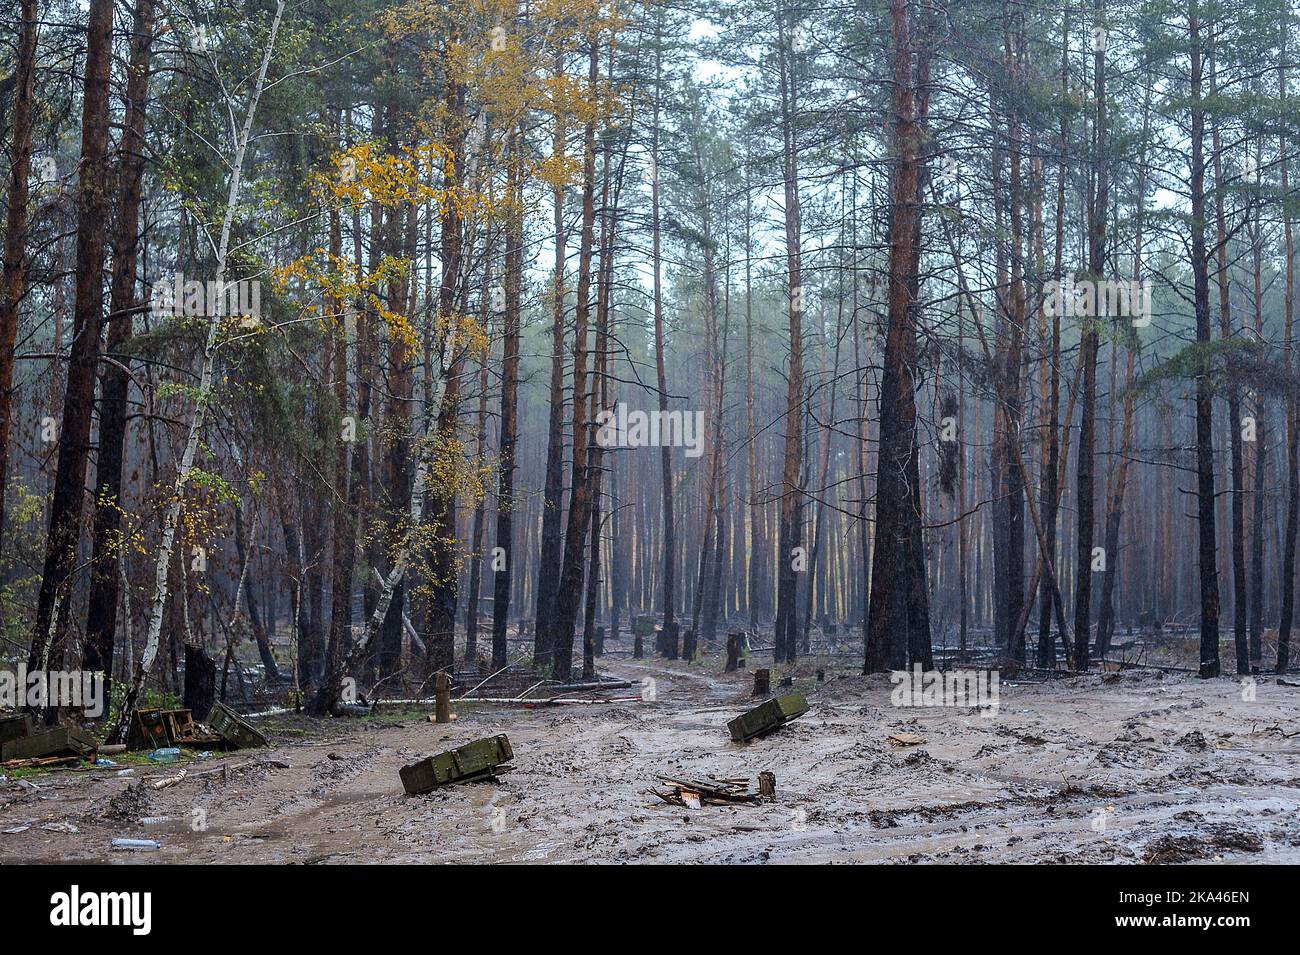 KHARKIV REGION, UKRAINE - OCTOBER 26, 2022 - Ammunition boxes are scattered among pine trees in a forest near Izium after the liberation of the area f Stock Photo